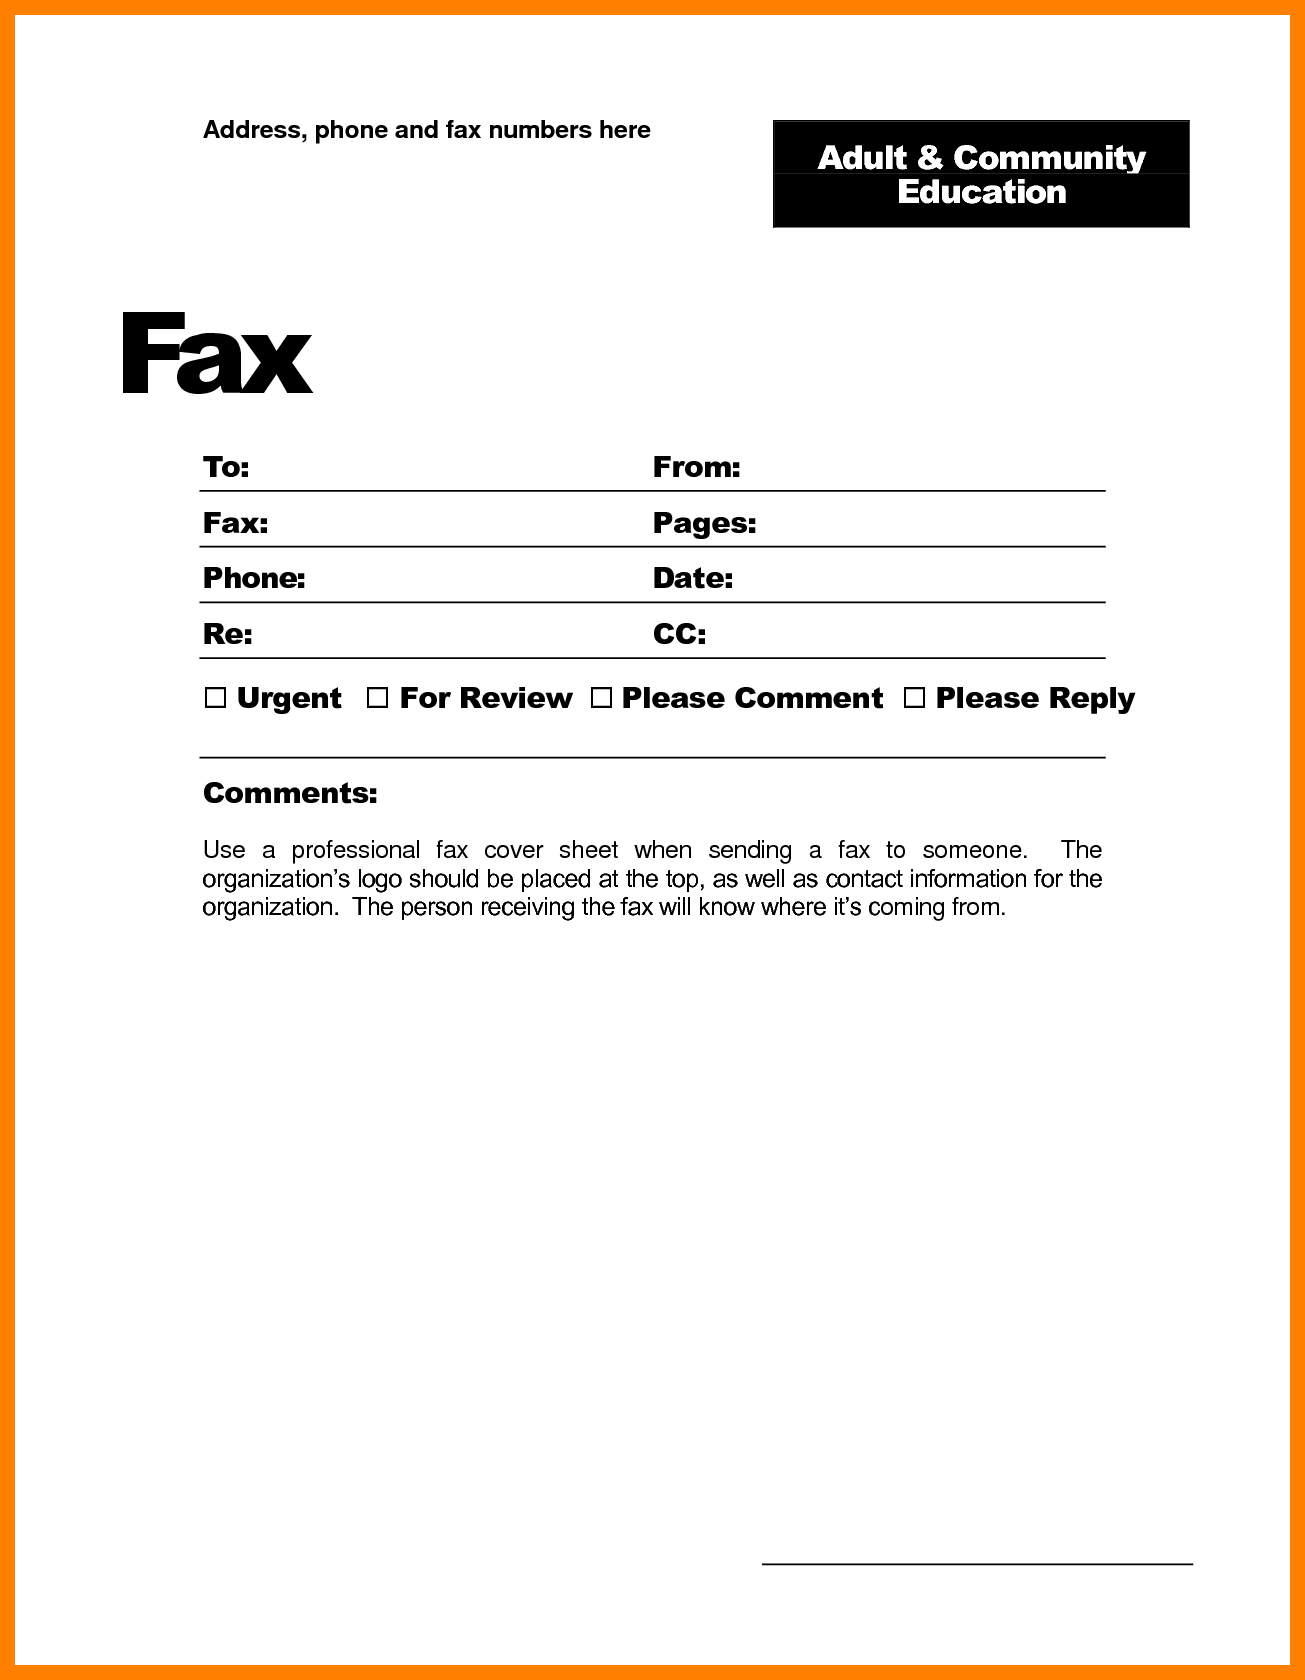 Fax Cover Sheet Template Word Printable - Online Cover Letter Library